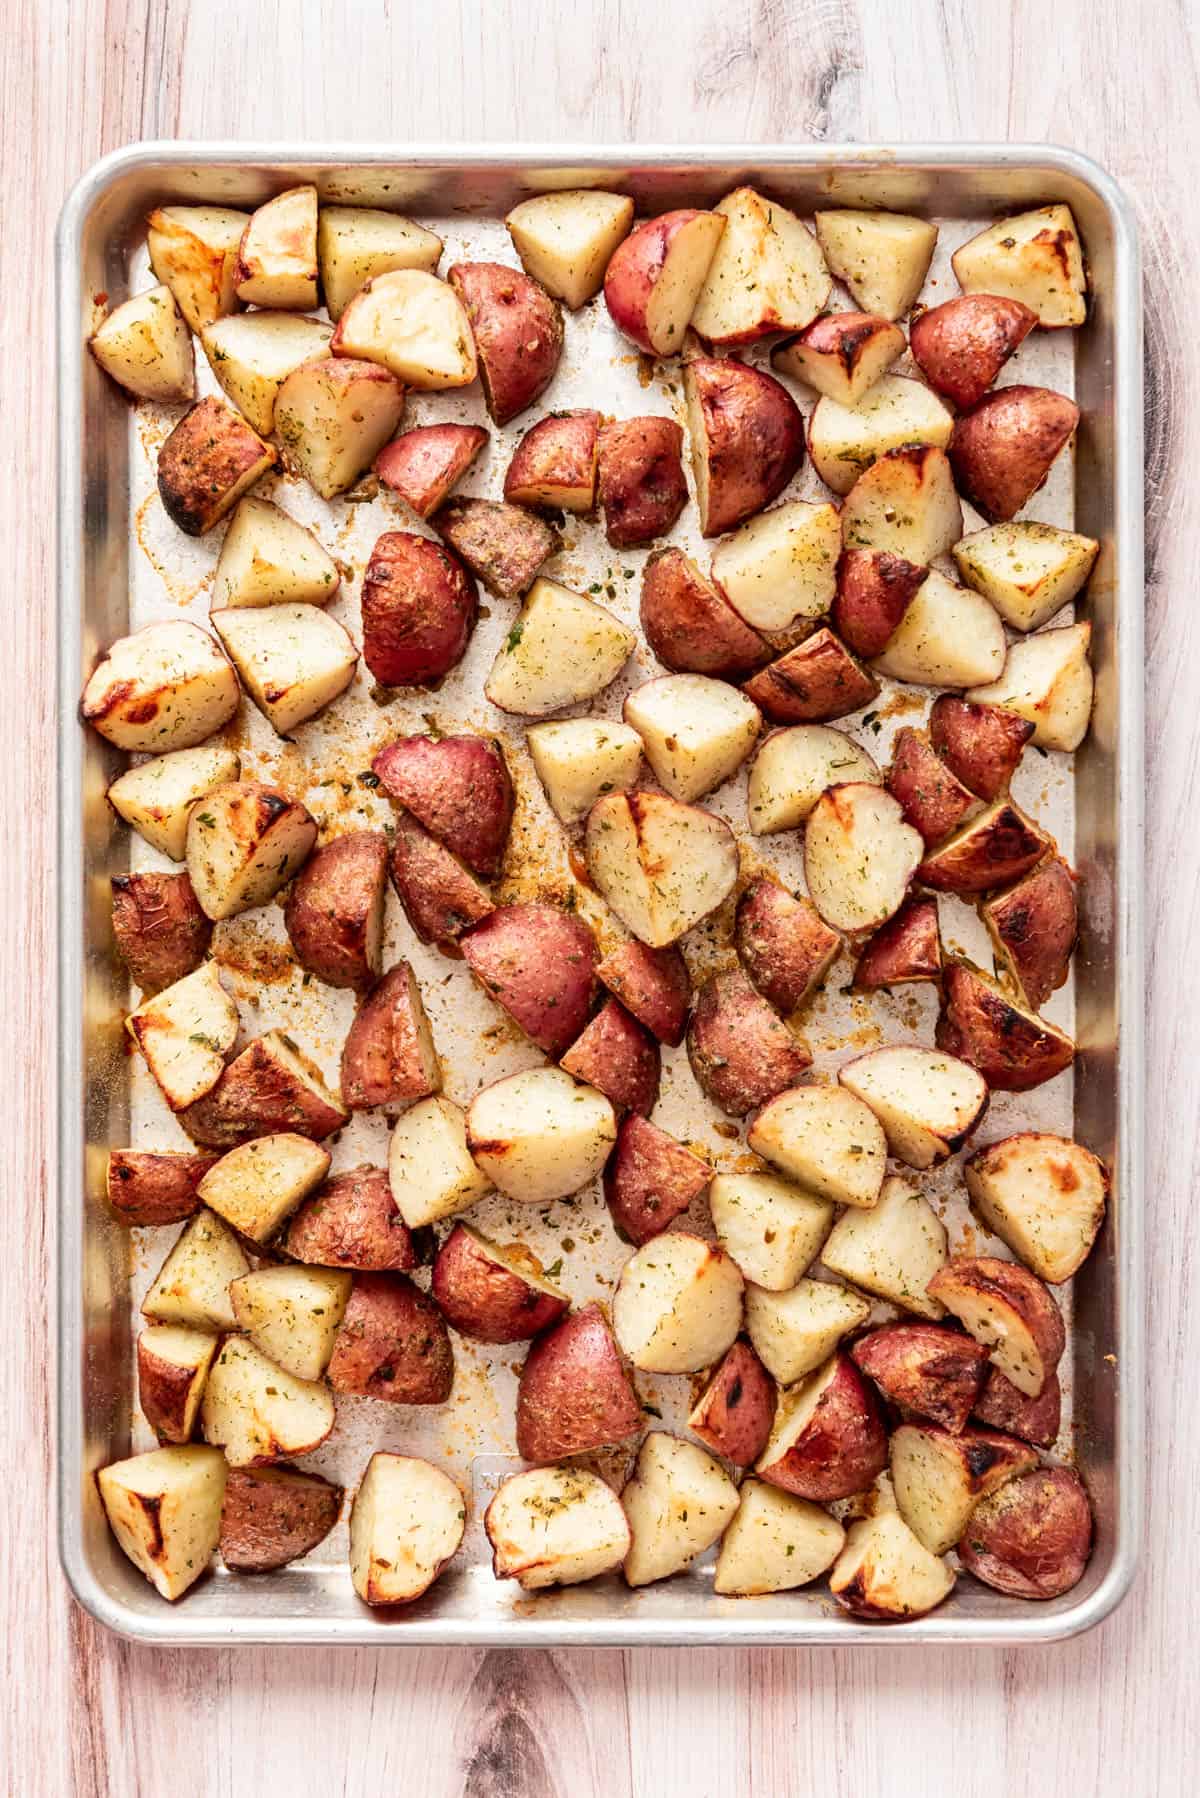 Quartered red potatoes roasted on a baking sheet.